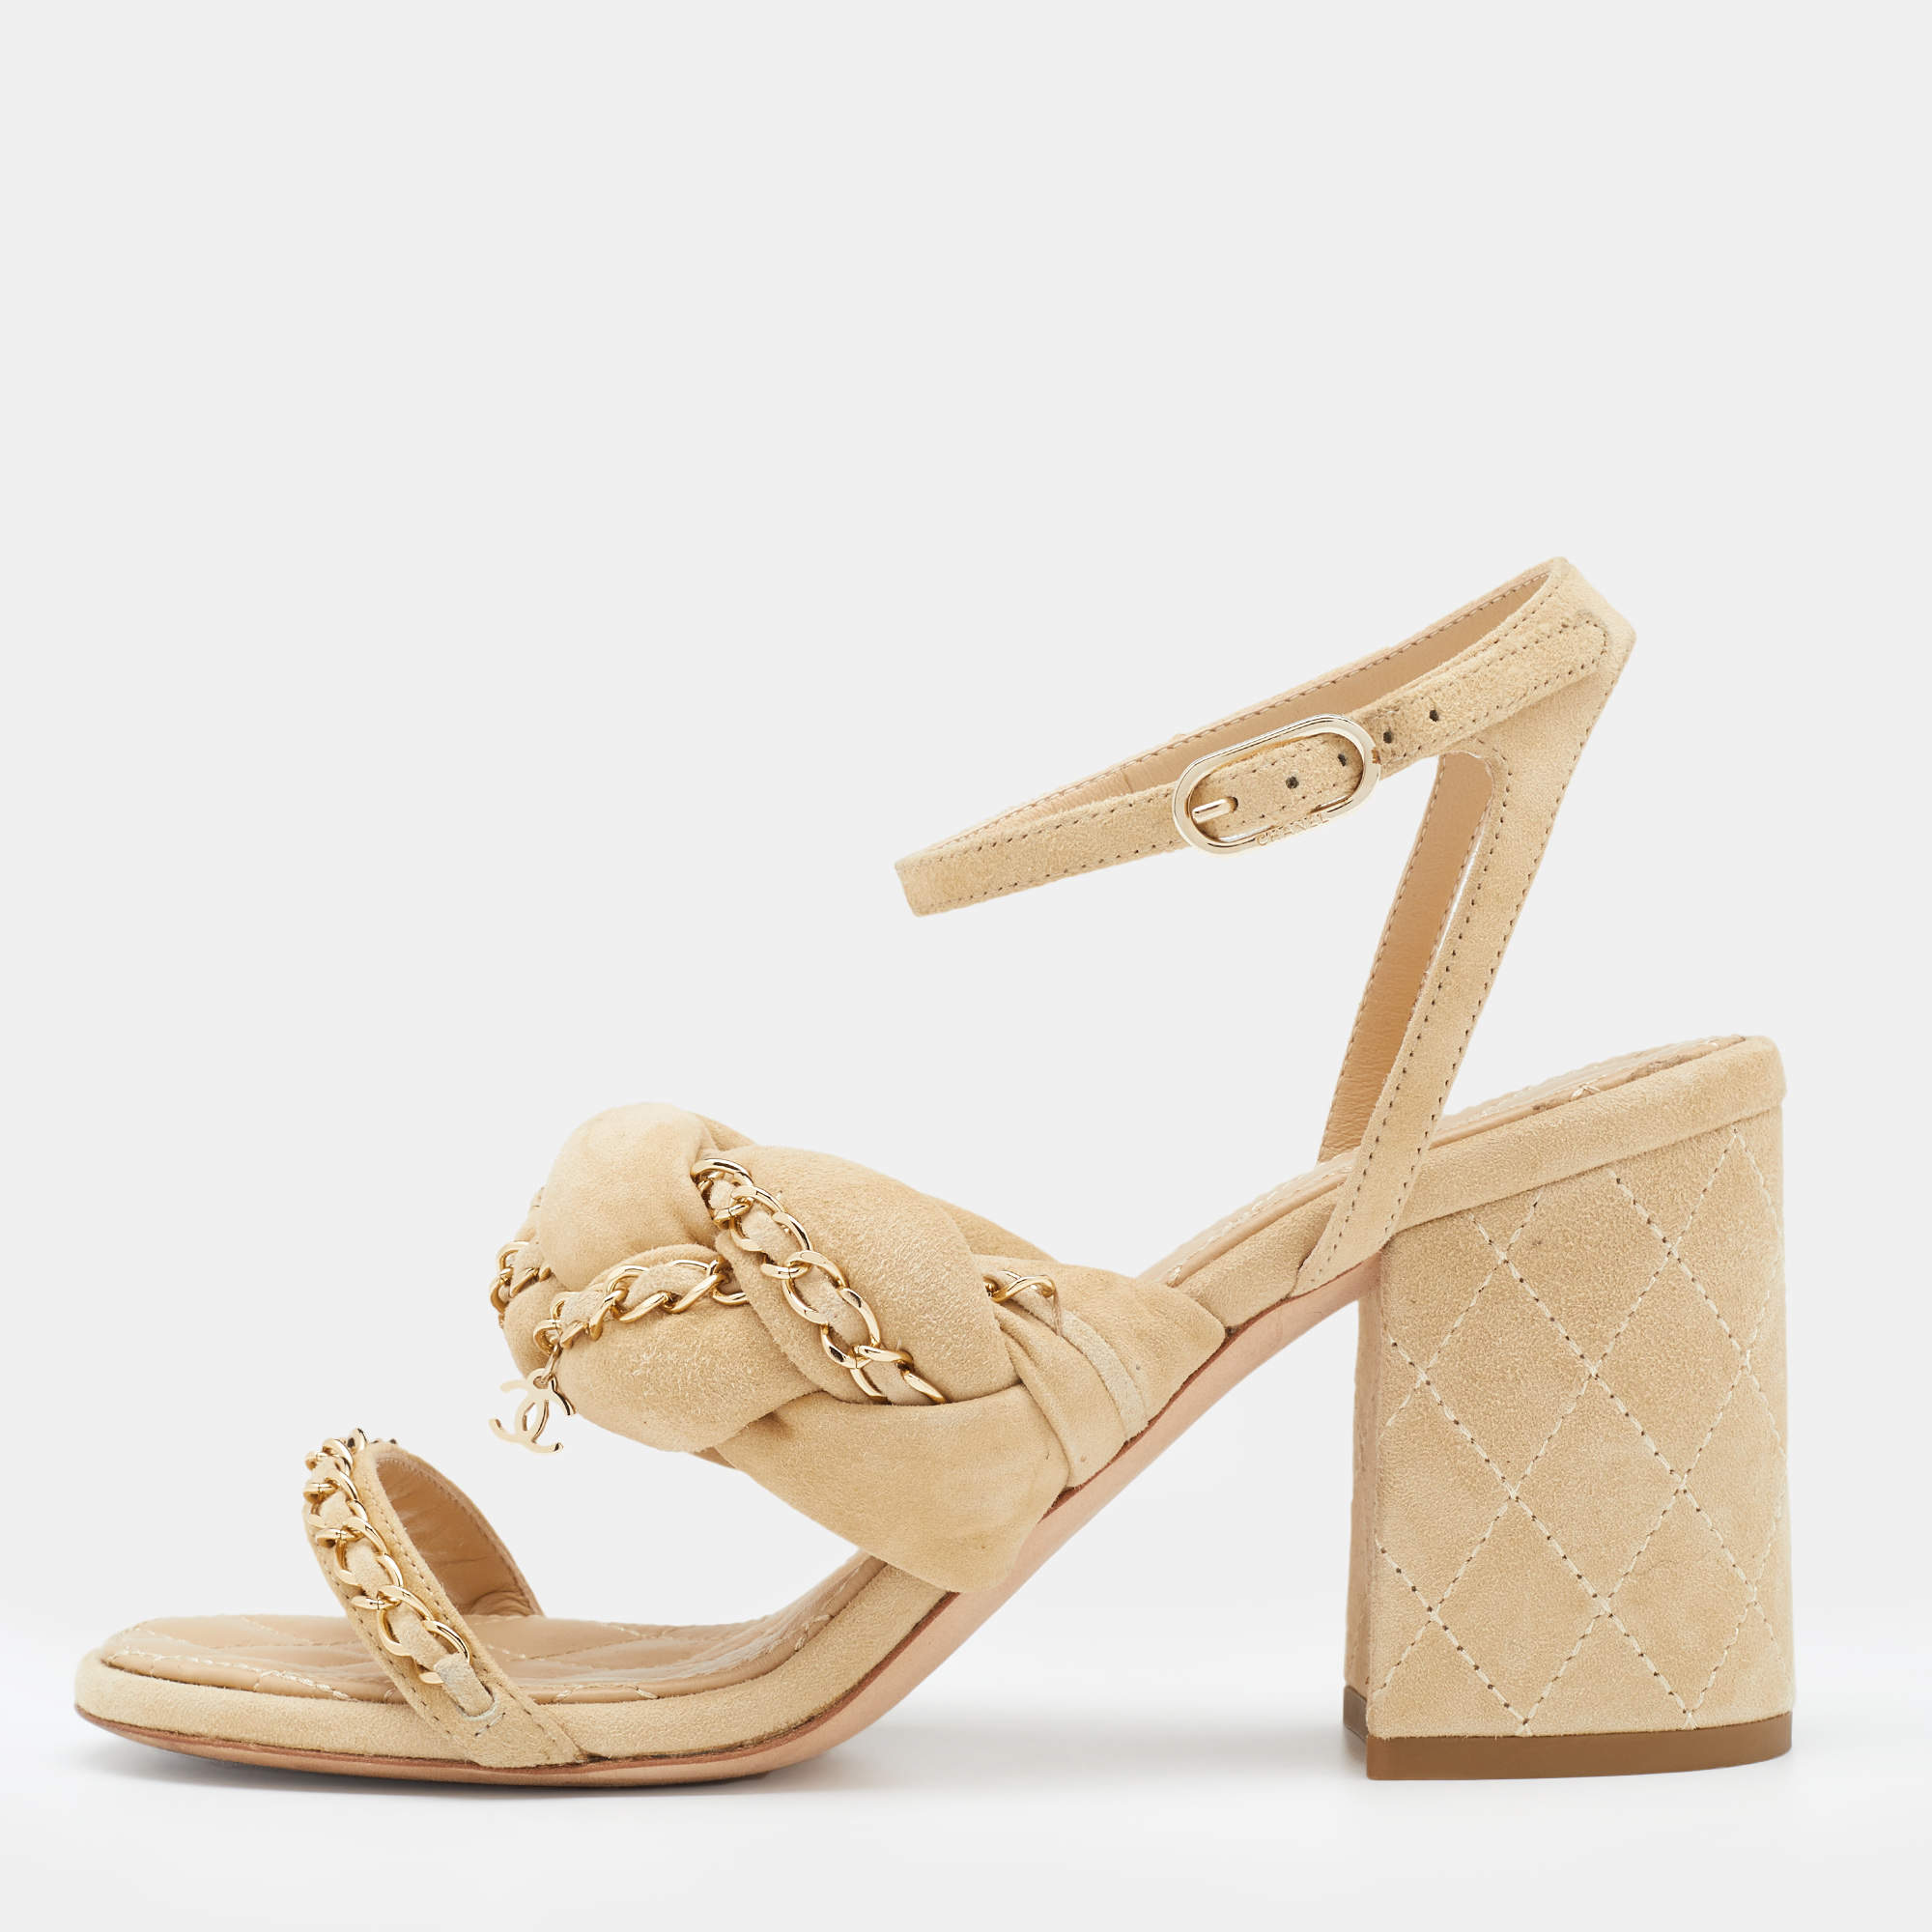 Chanel Beige Suede Braided Chain Embellished Ankle Strap Sandals Size 37.5  Chanel